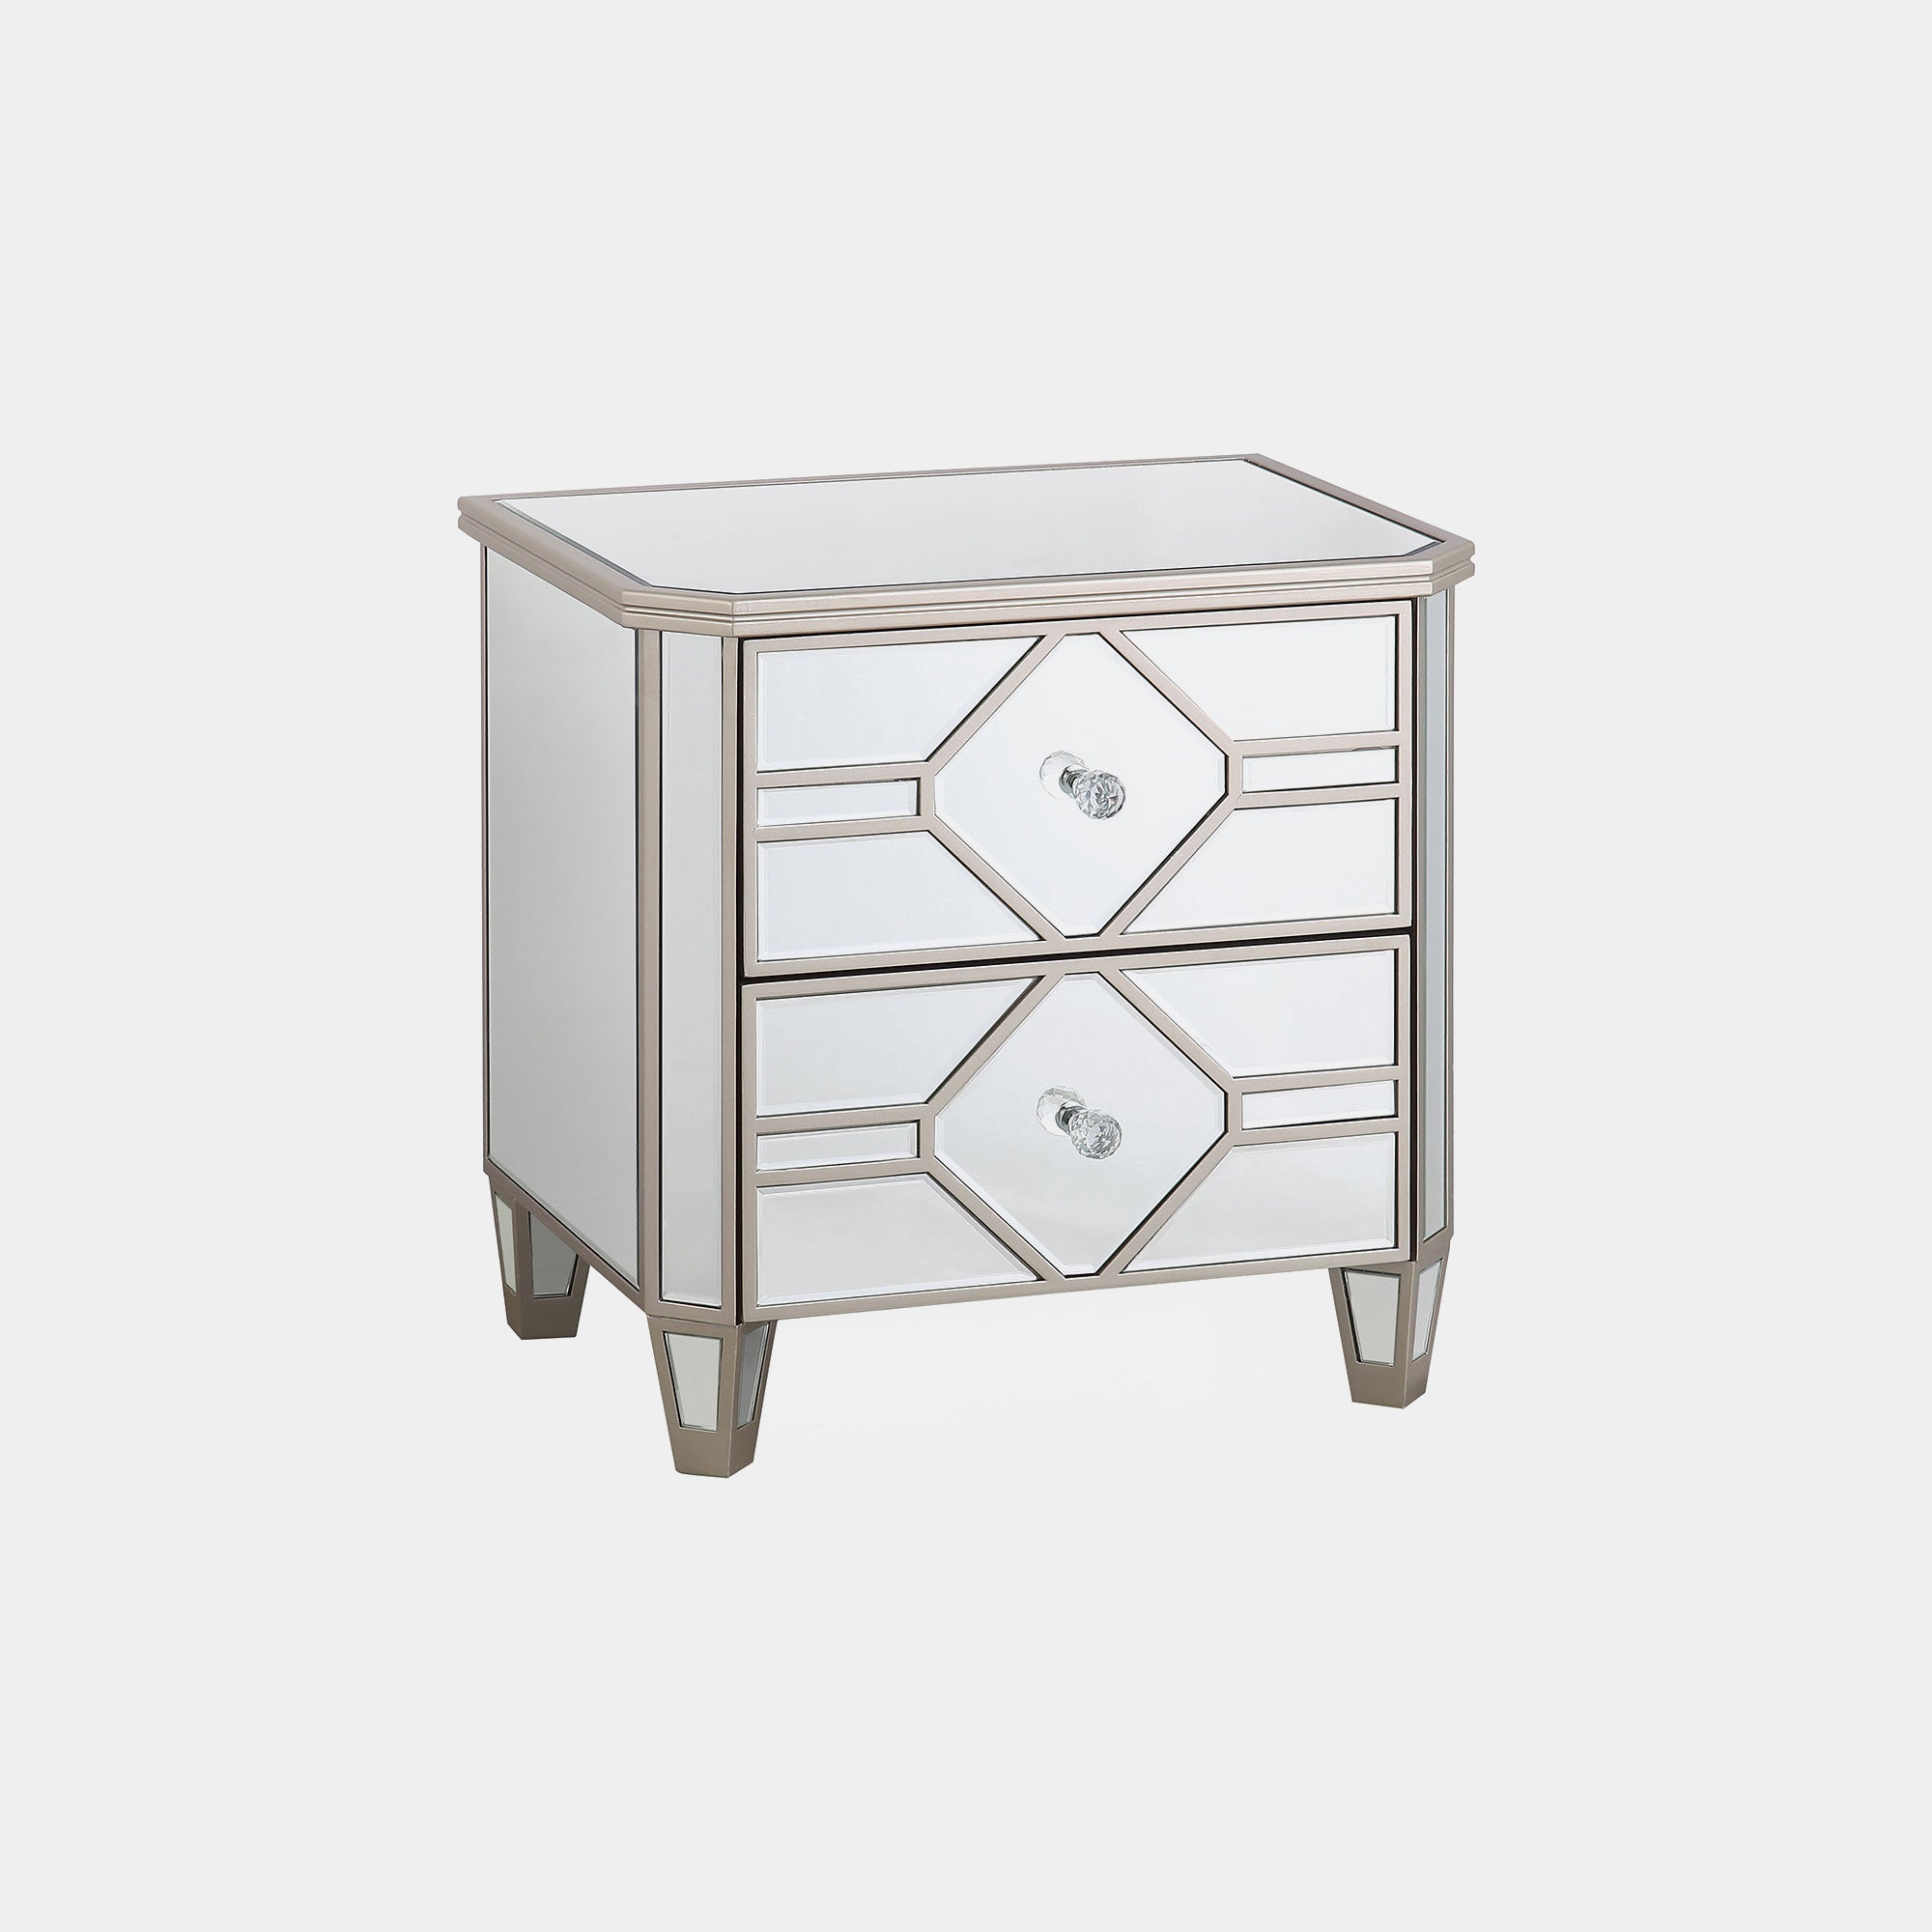 Ruby - 2 Drawer Mirrored Bedside Chest